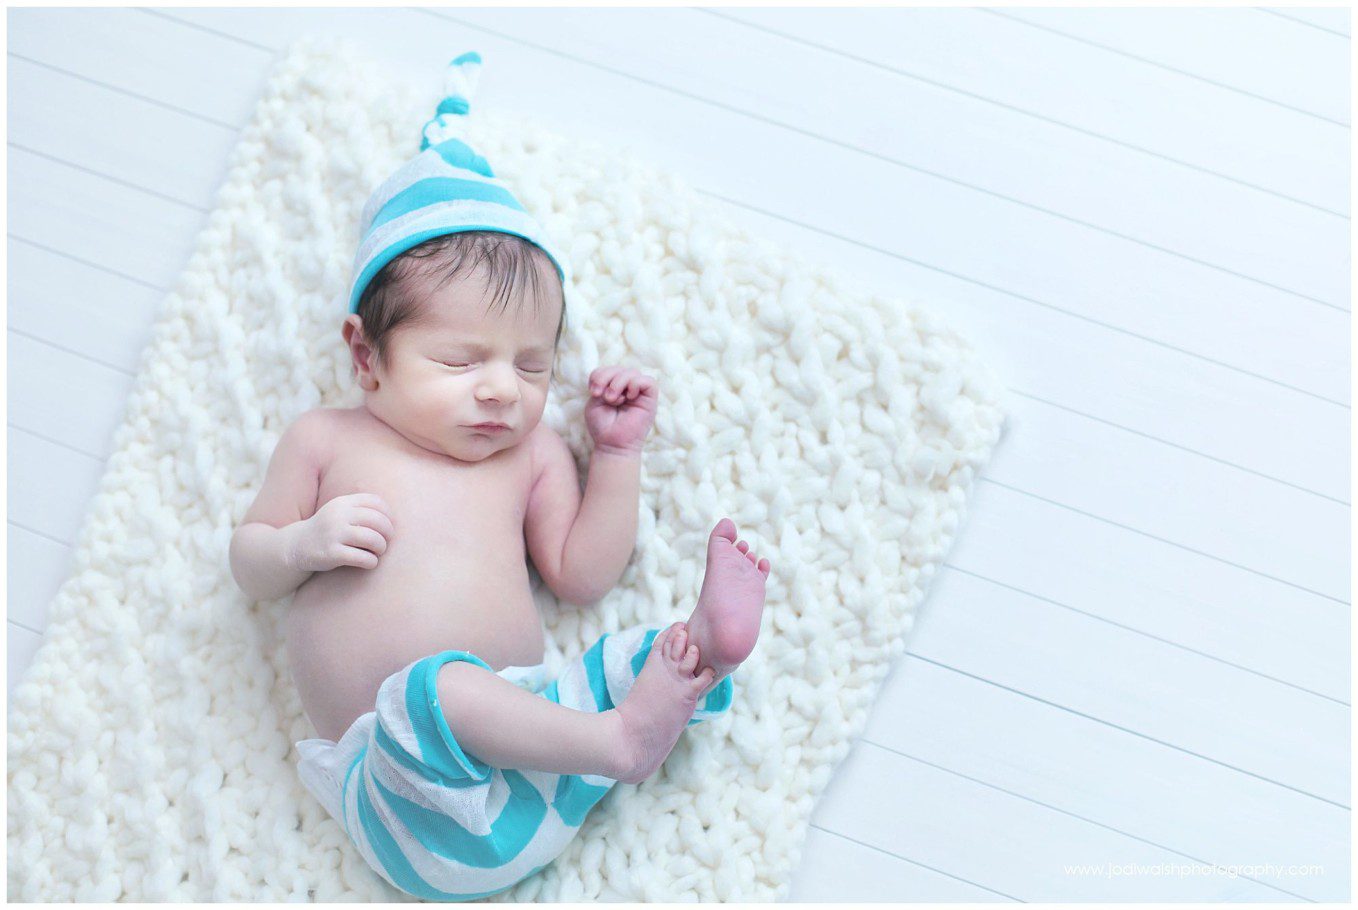 image of a baby boy with blue striped hat and pants. He's sleeping on a cream knitted blanket and white plank floor.